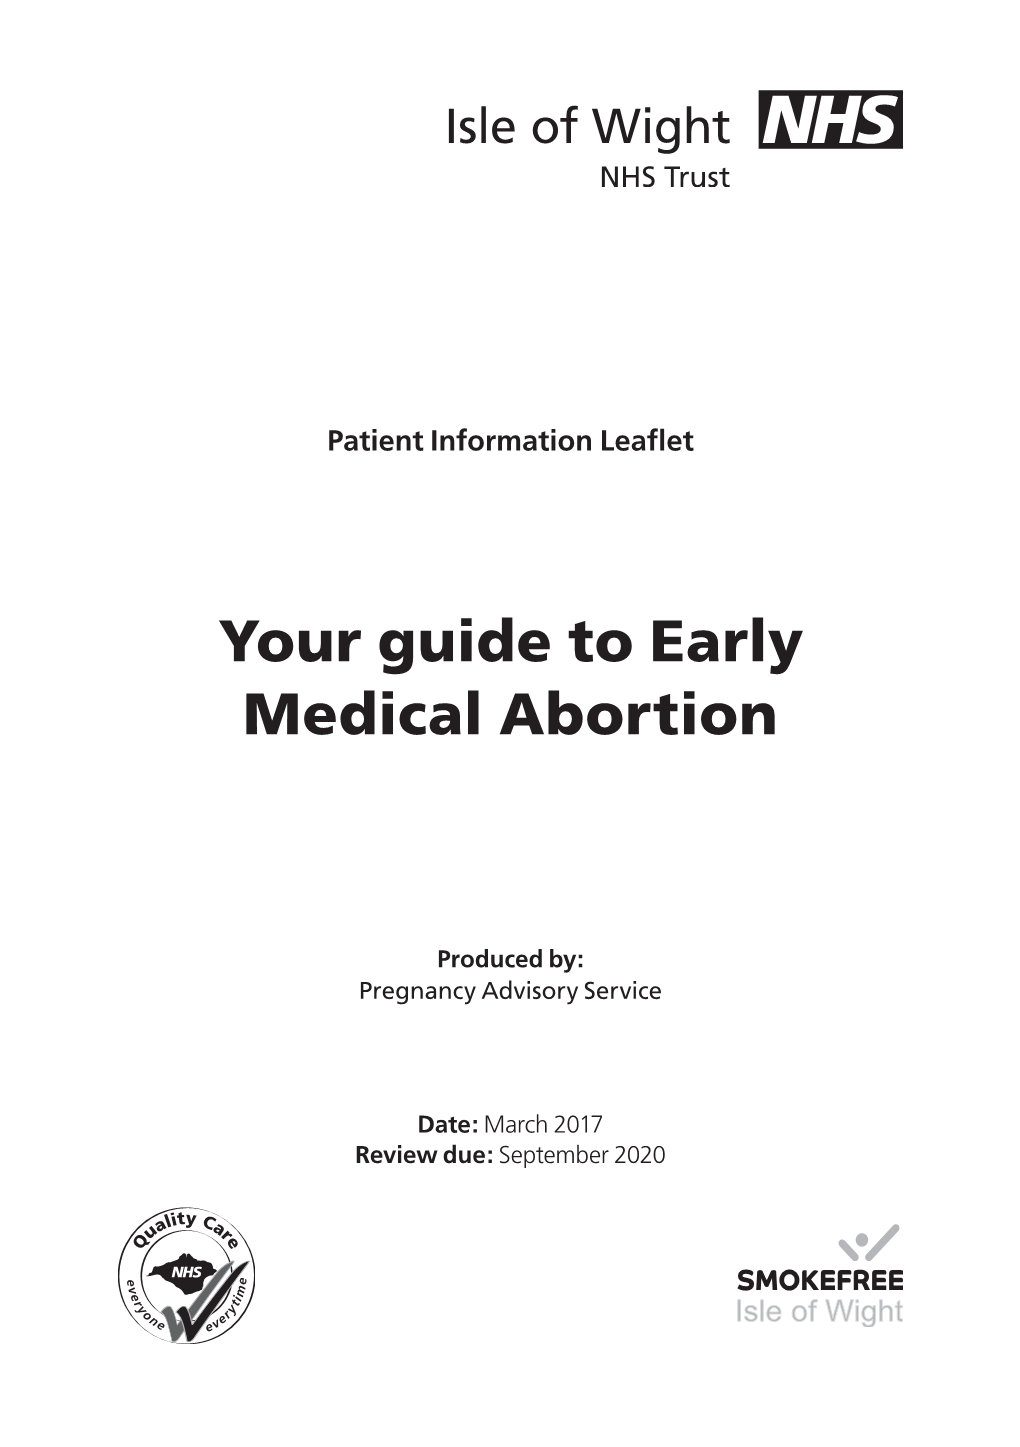 Your Guide to Early Medical Abortion